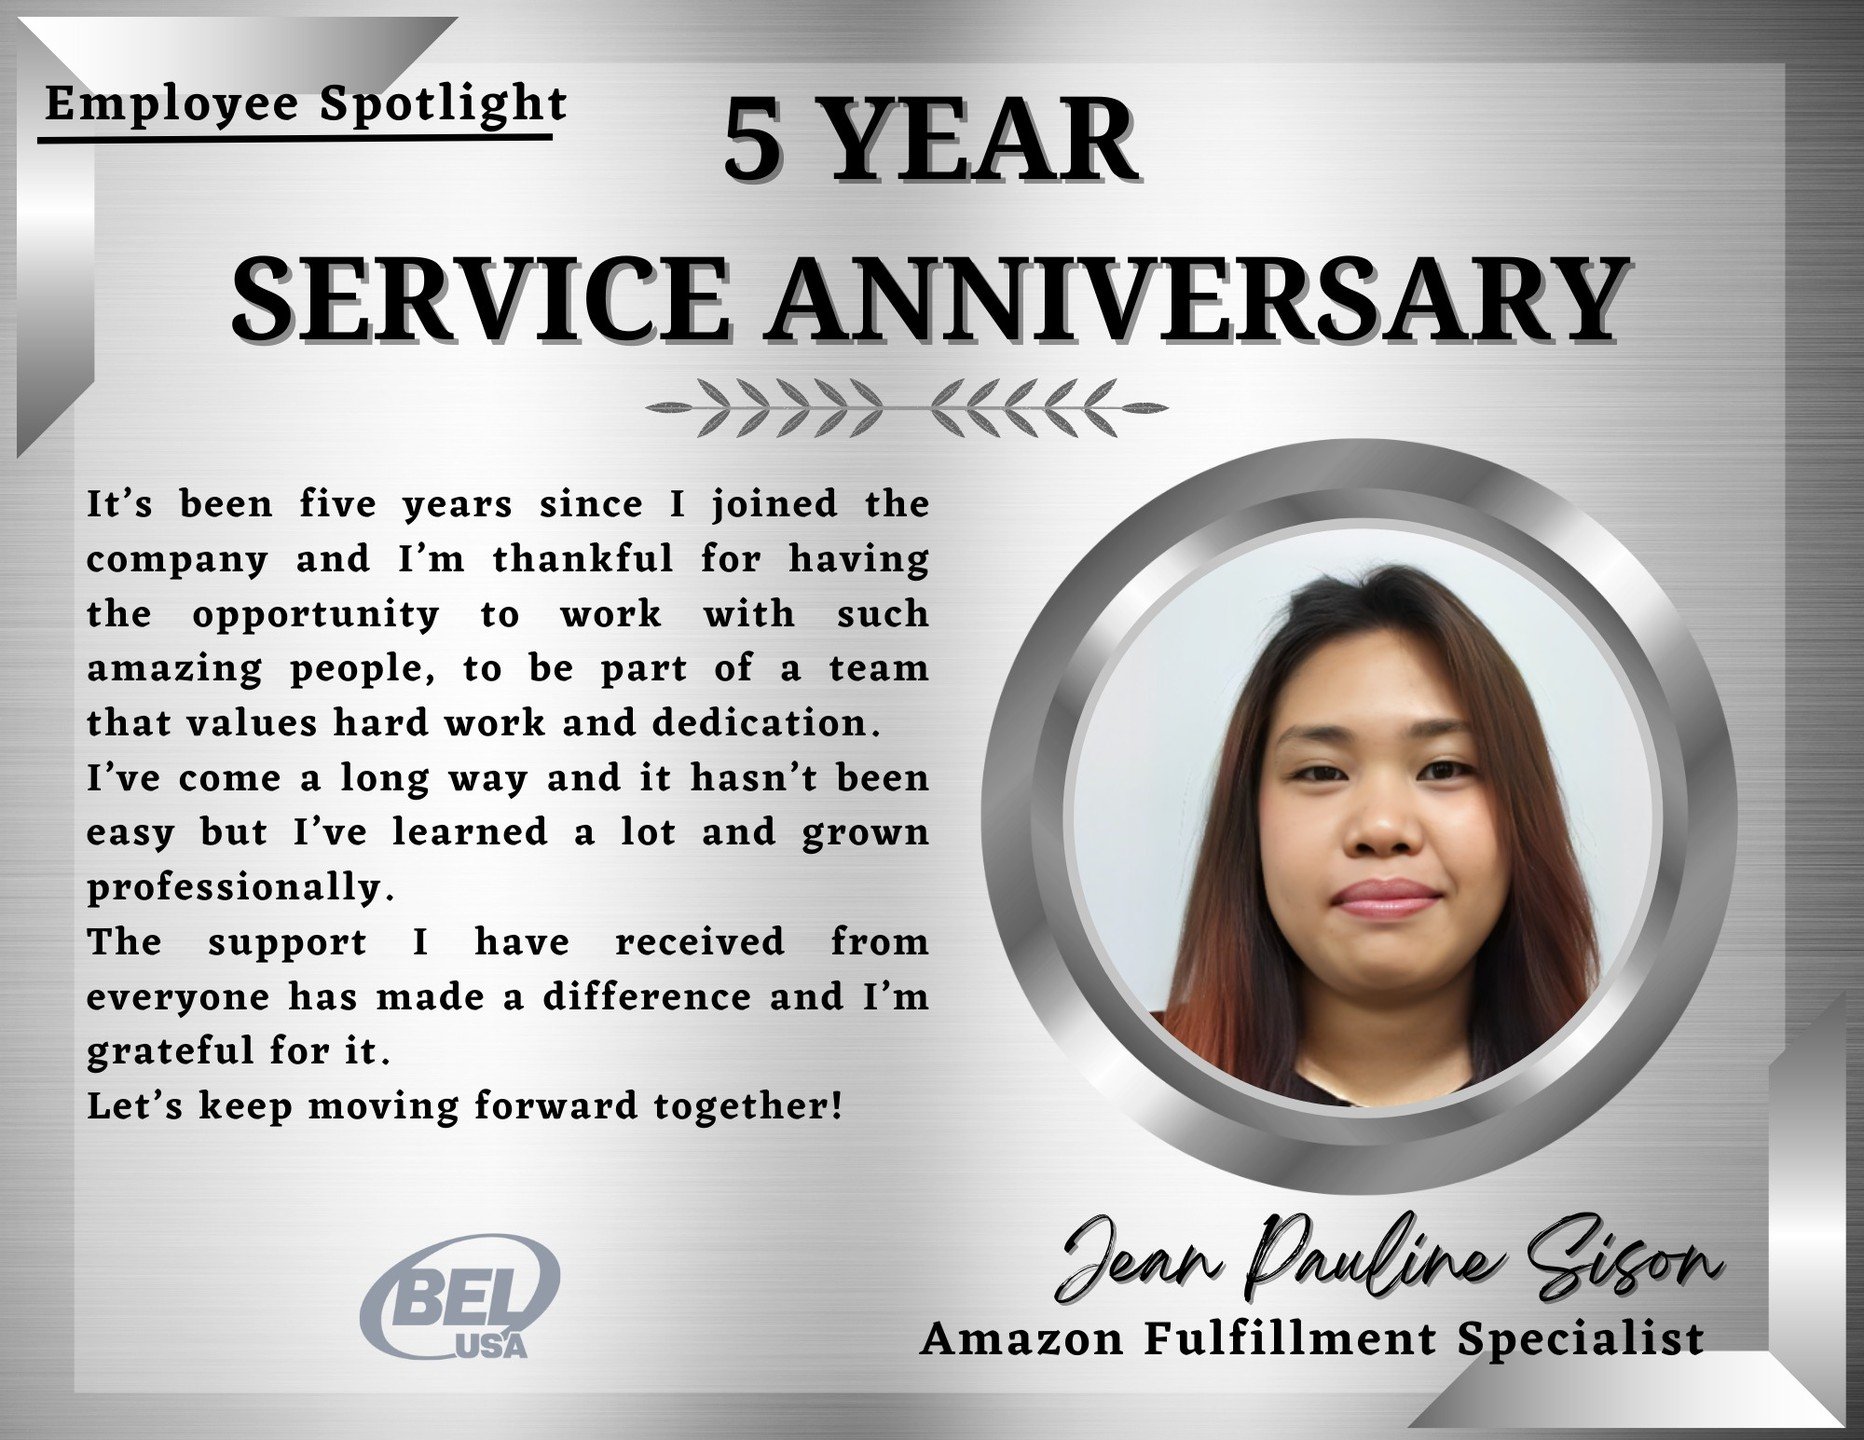 Celebrating 5 Fantastic Years with Jean Pauline Sison! 🎉

Let's give a big shoutout to Jean Pauline Sison, our dedicated Amazon Fulfillment Specialist, on her 5th work anniversary with us! 

Jean's commitment to excellence and her exceptional attent